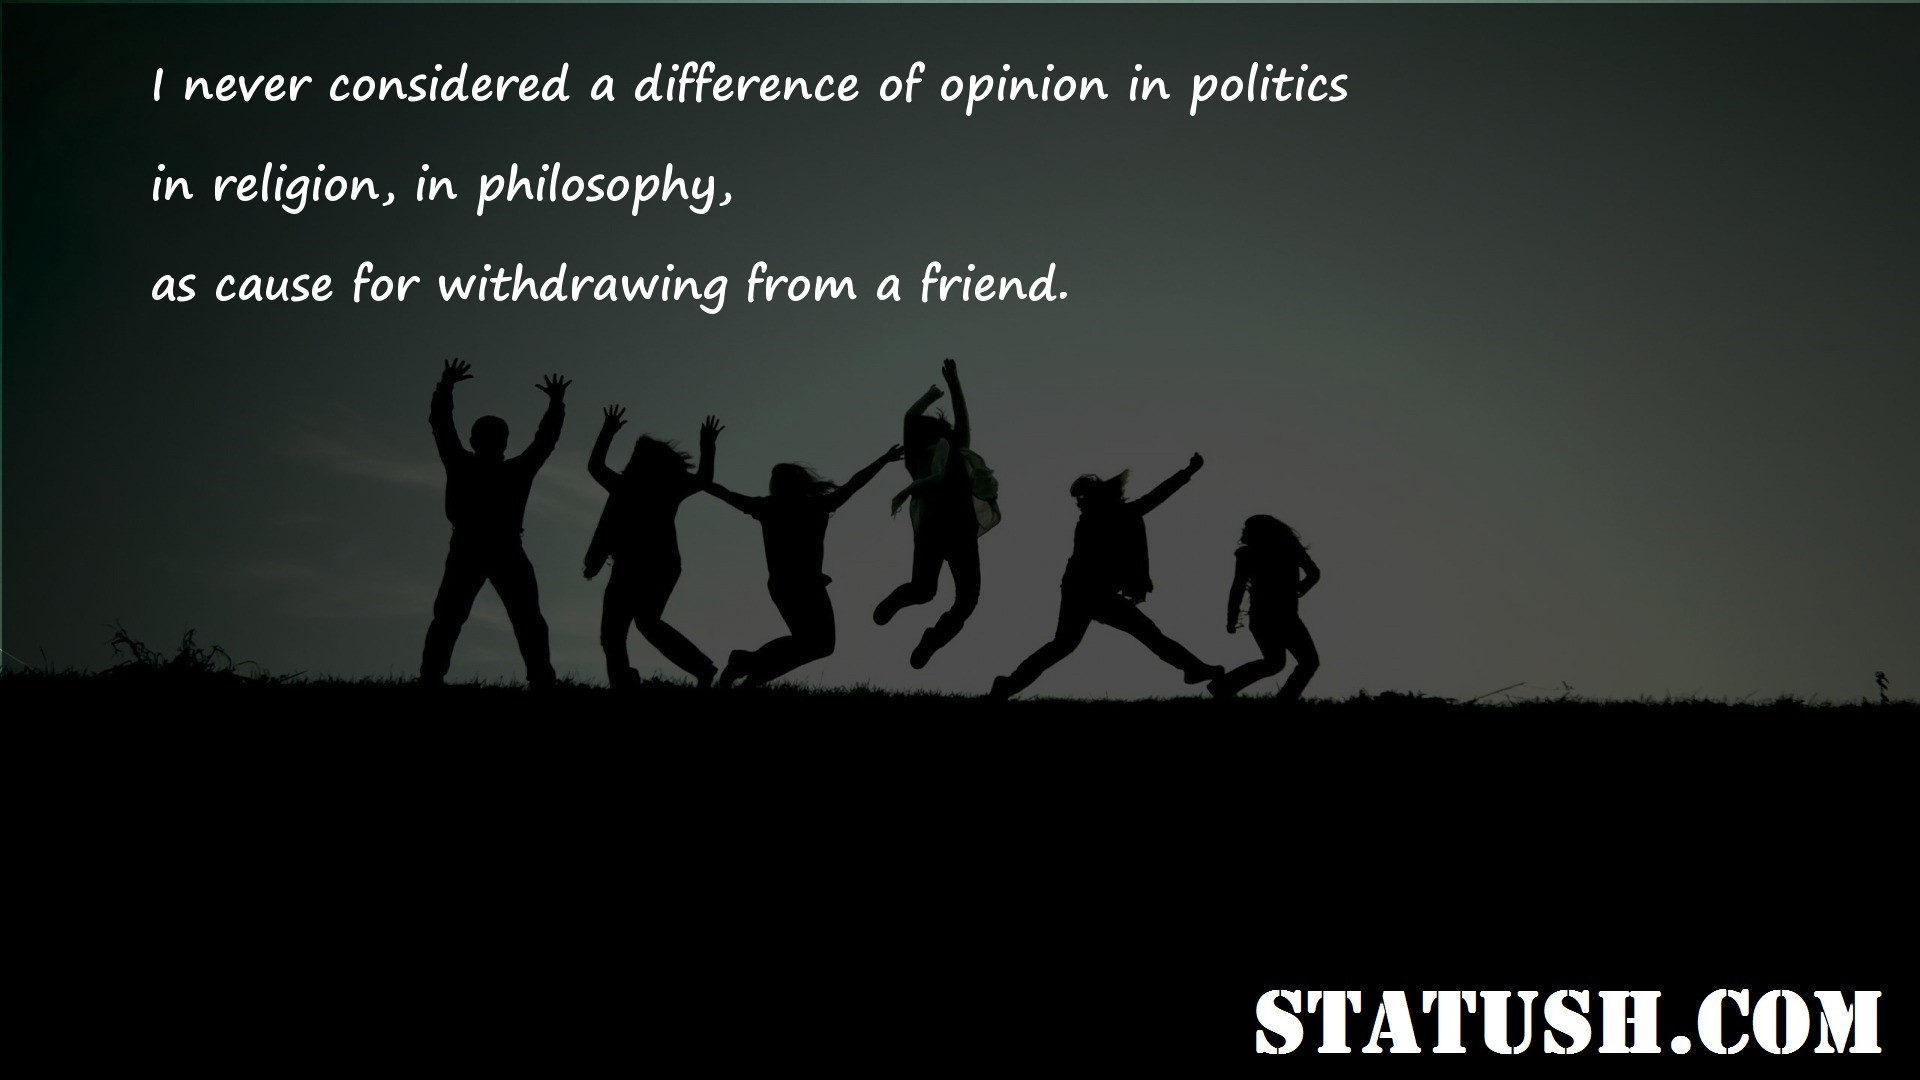 I never considered a difference of opinion in politics - Friendship Quotes at statush.com